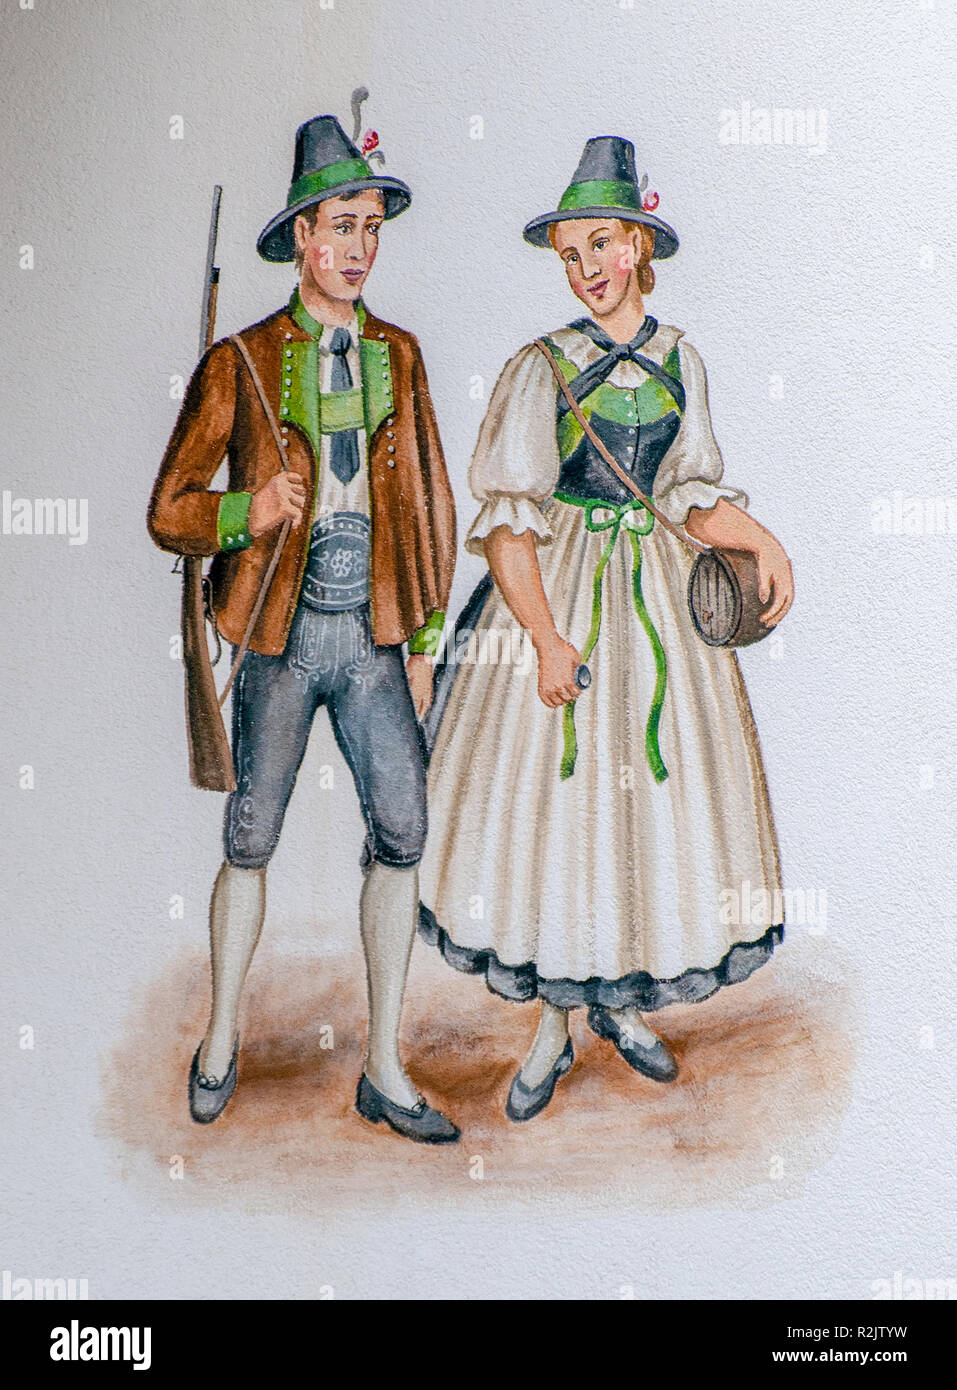 Illustration of a Tyrolean couple in traditional clothing and green felt hat. The man is carrying a hunting rifle Stock Photo